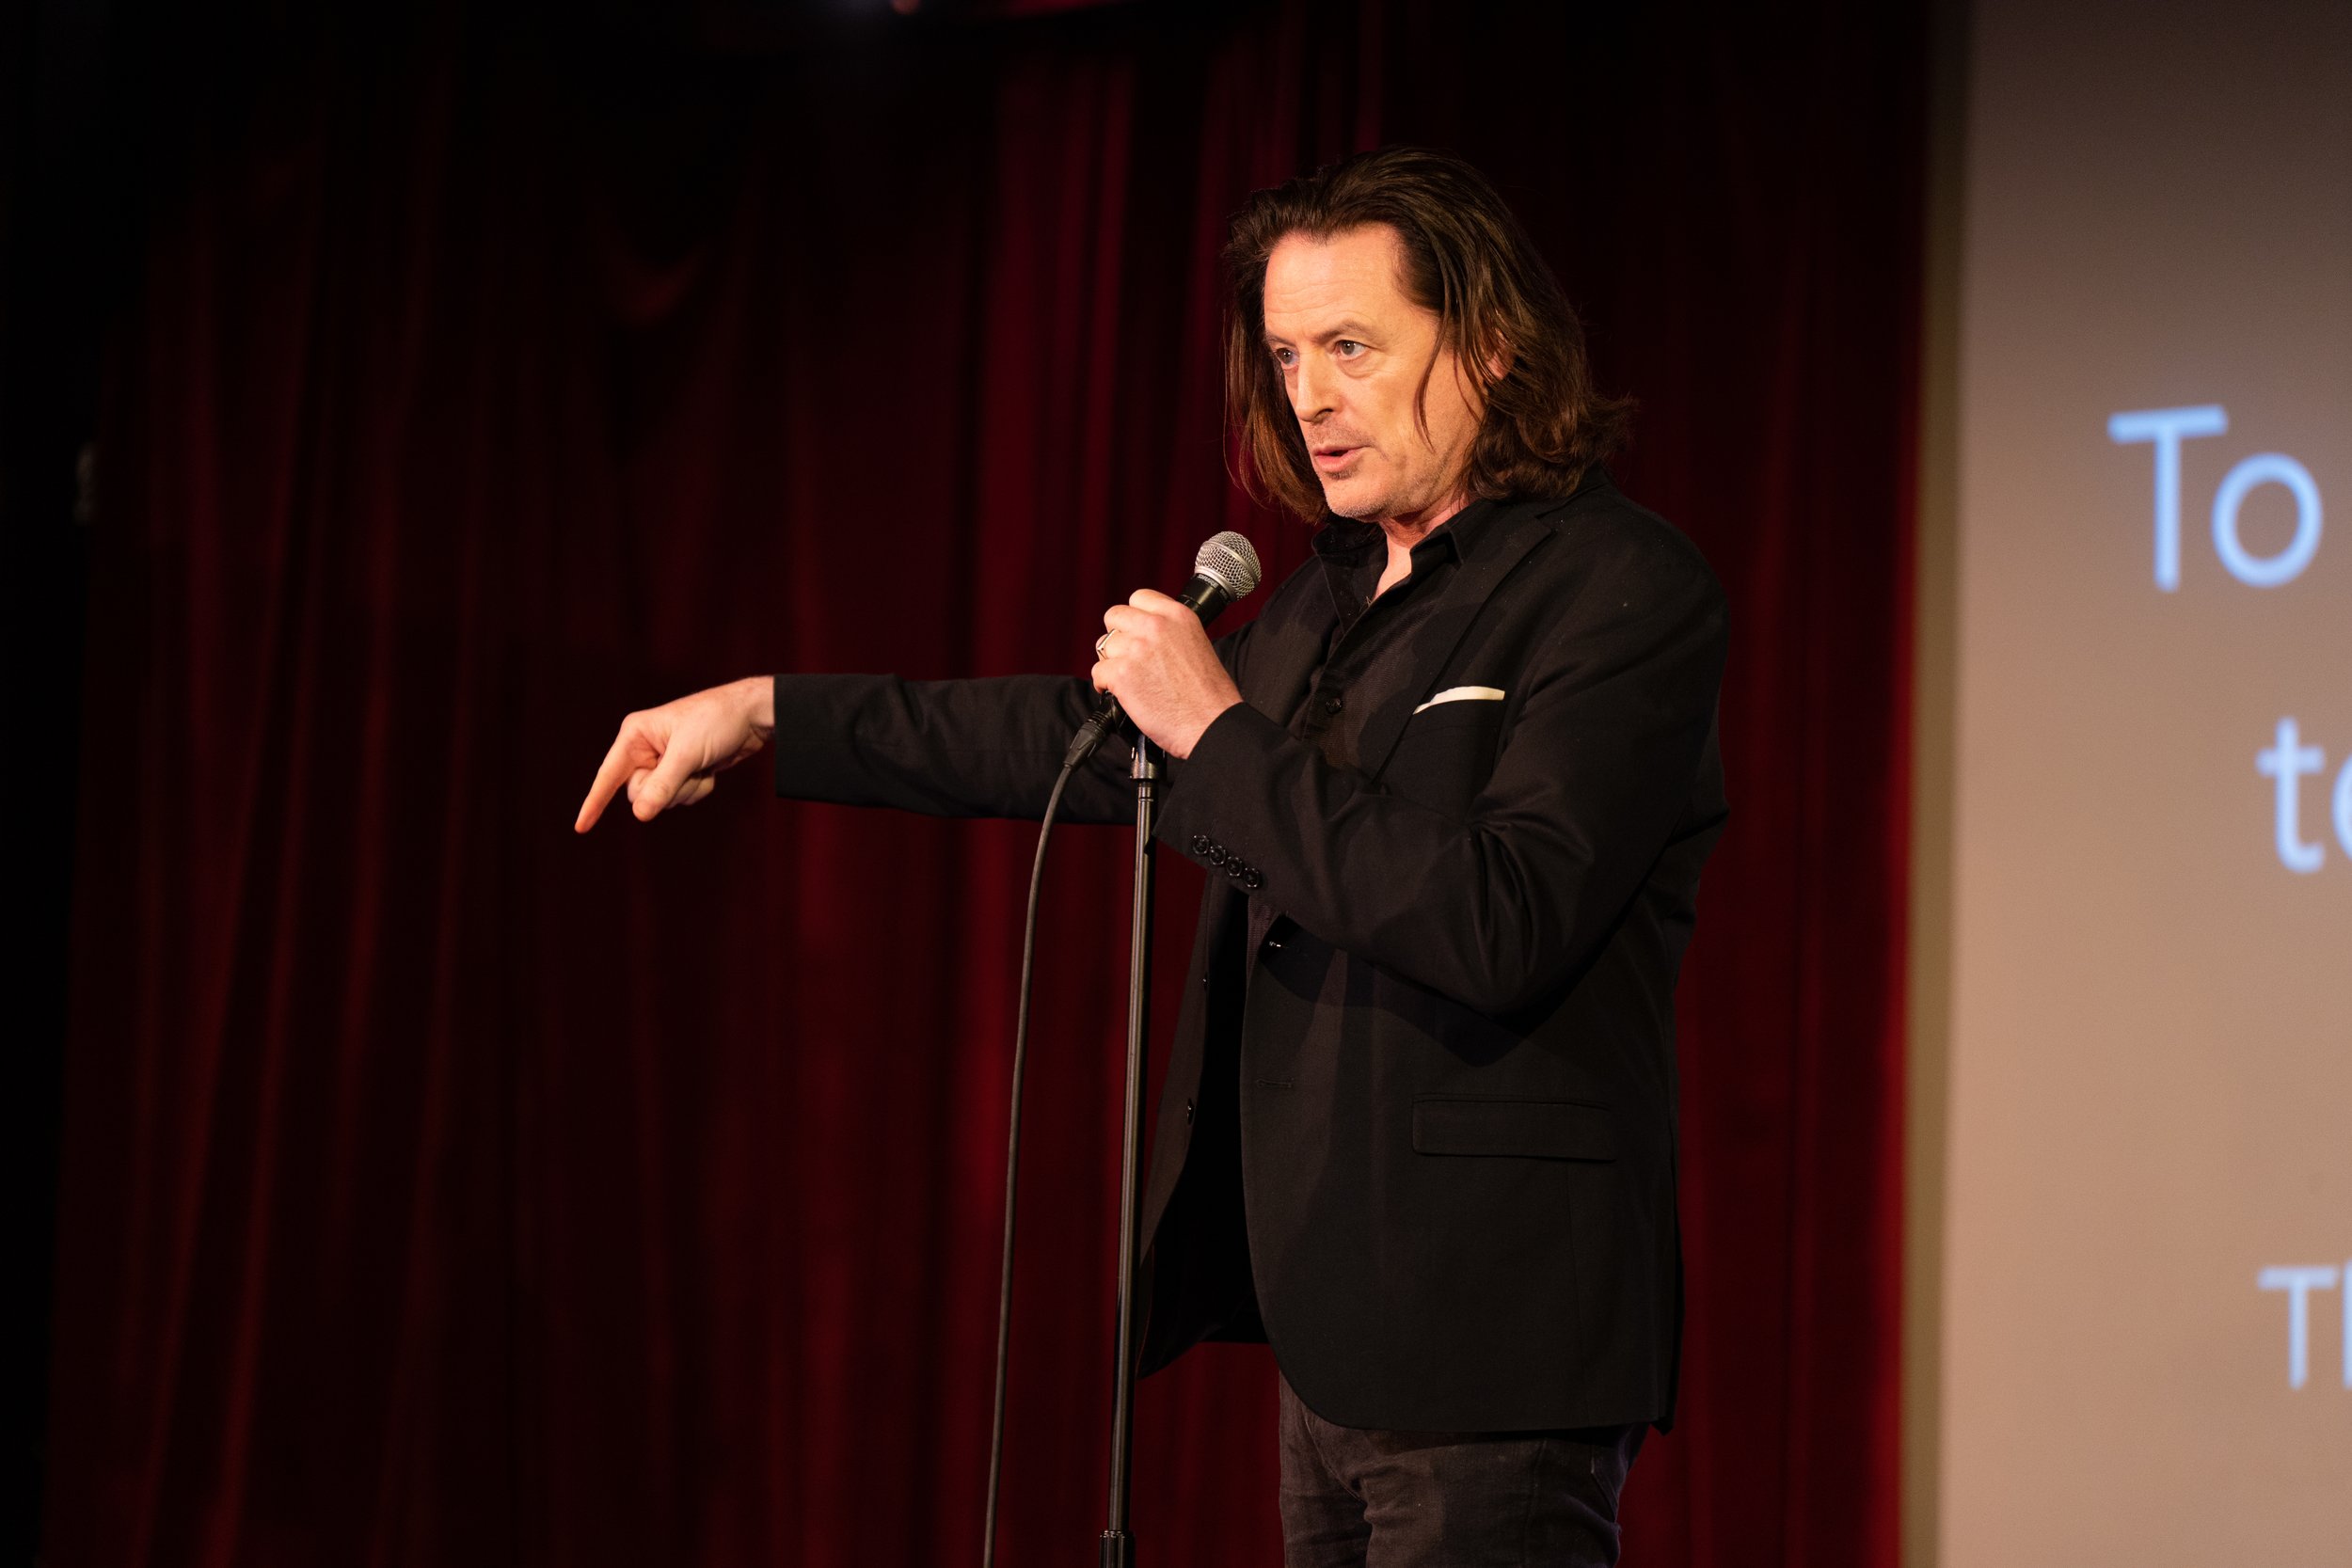  Host of “Tell Me Everything” John Fugelsang on stage at The Bell House in Brooklyn, NY.  